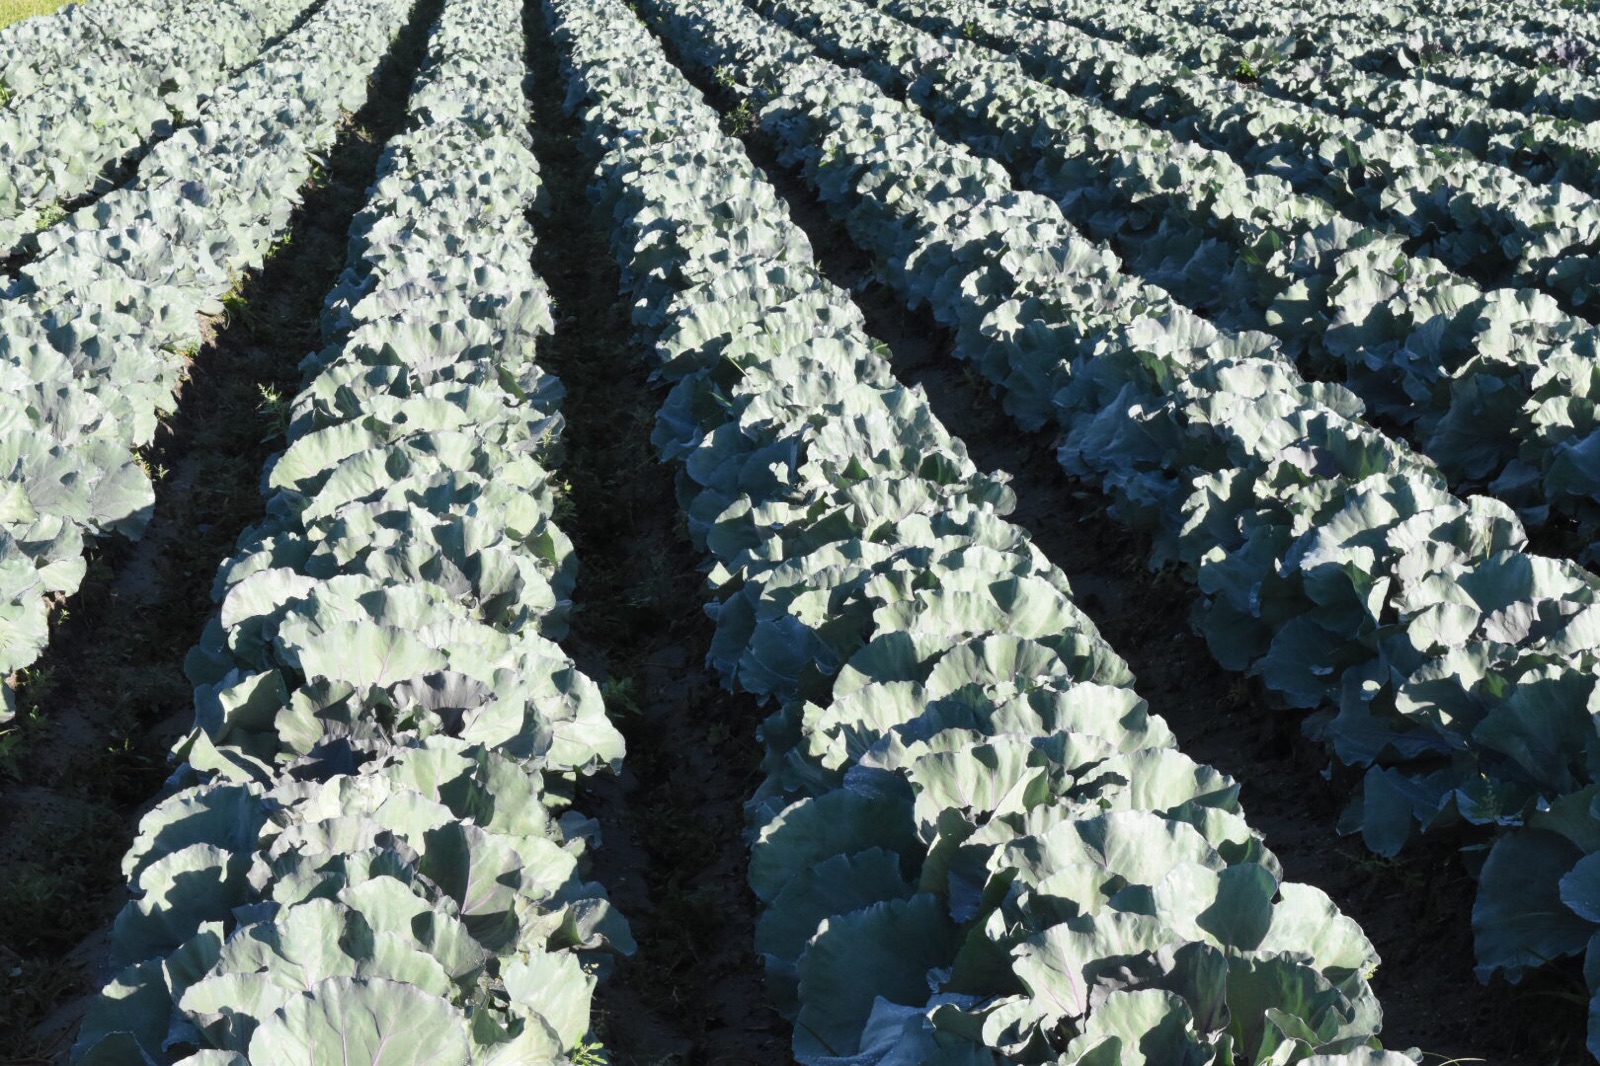  The Farm specializes in growing red and white cabbage, which was planted in early September.&nbsp; 